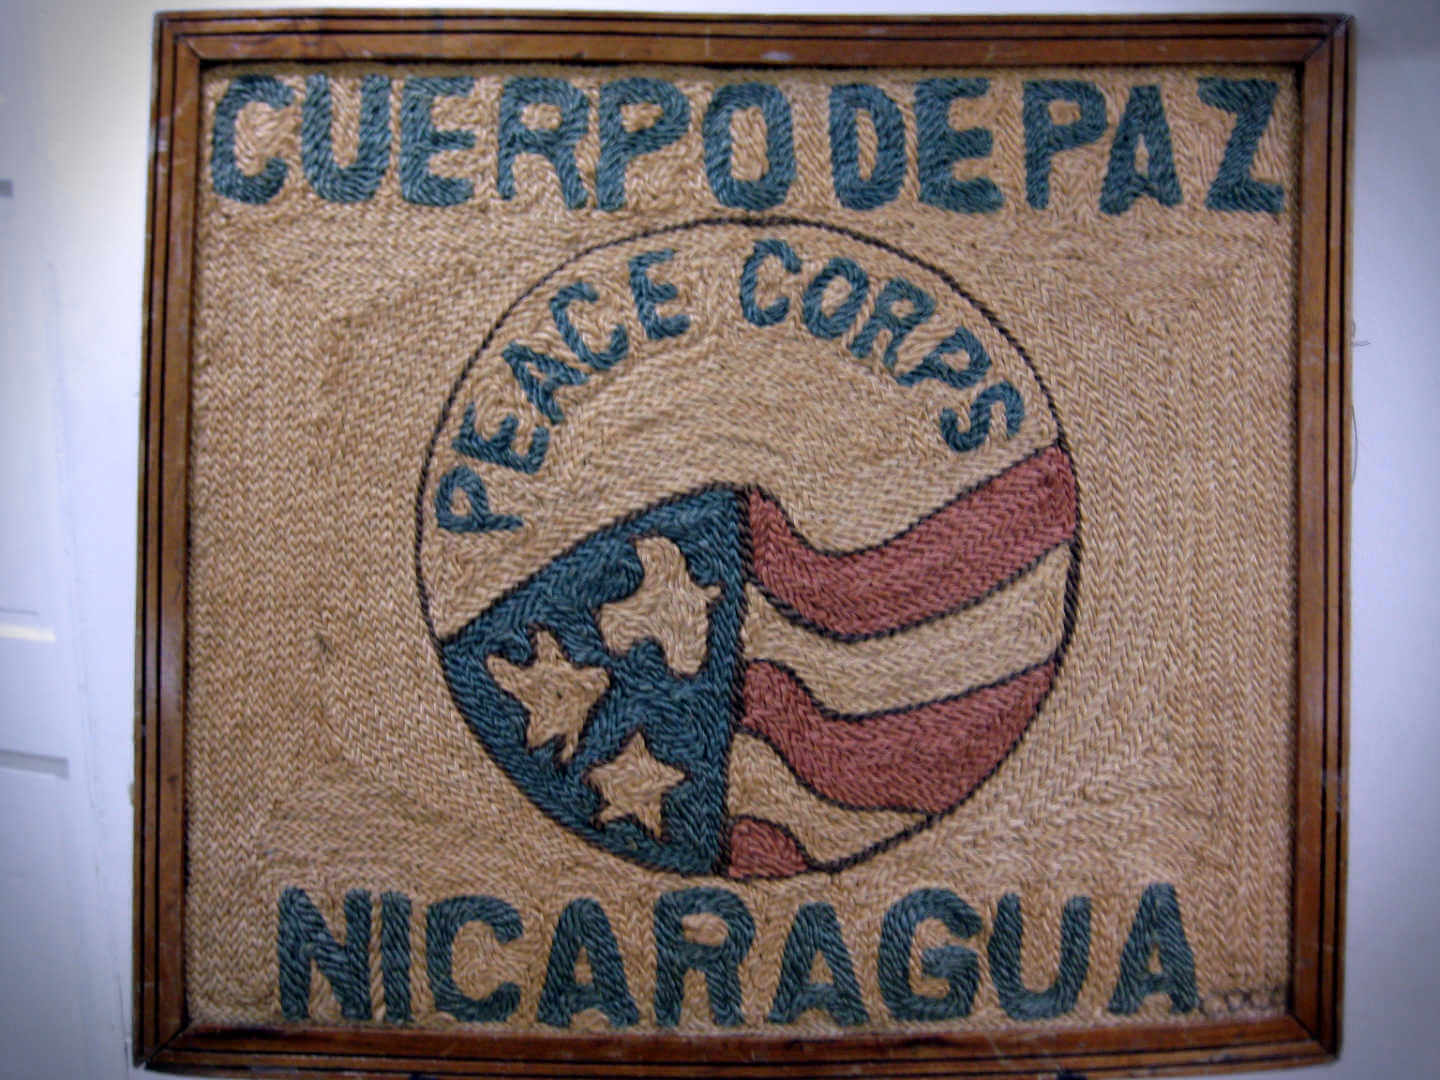 The local emblem of Peace Corps (Cuerpo de Paz in Spanish), in Nicaragua at the Managua HQ.